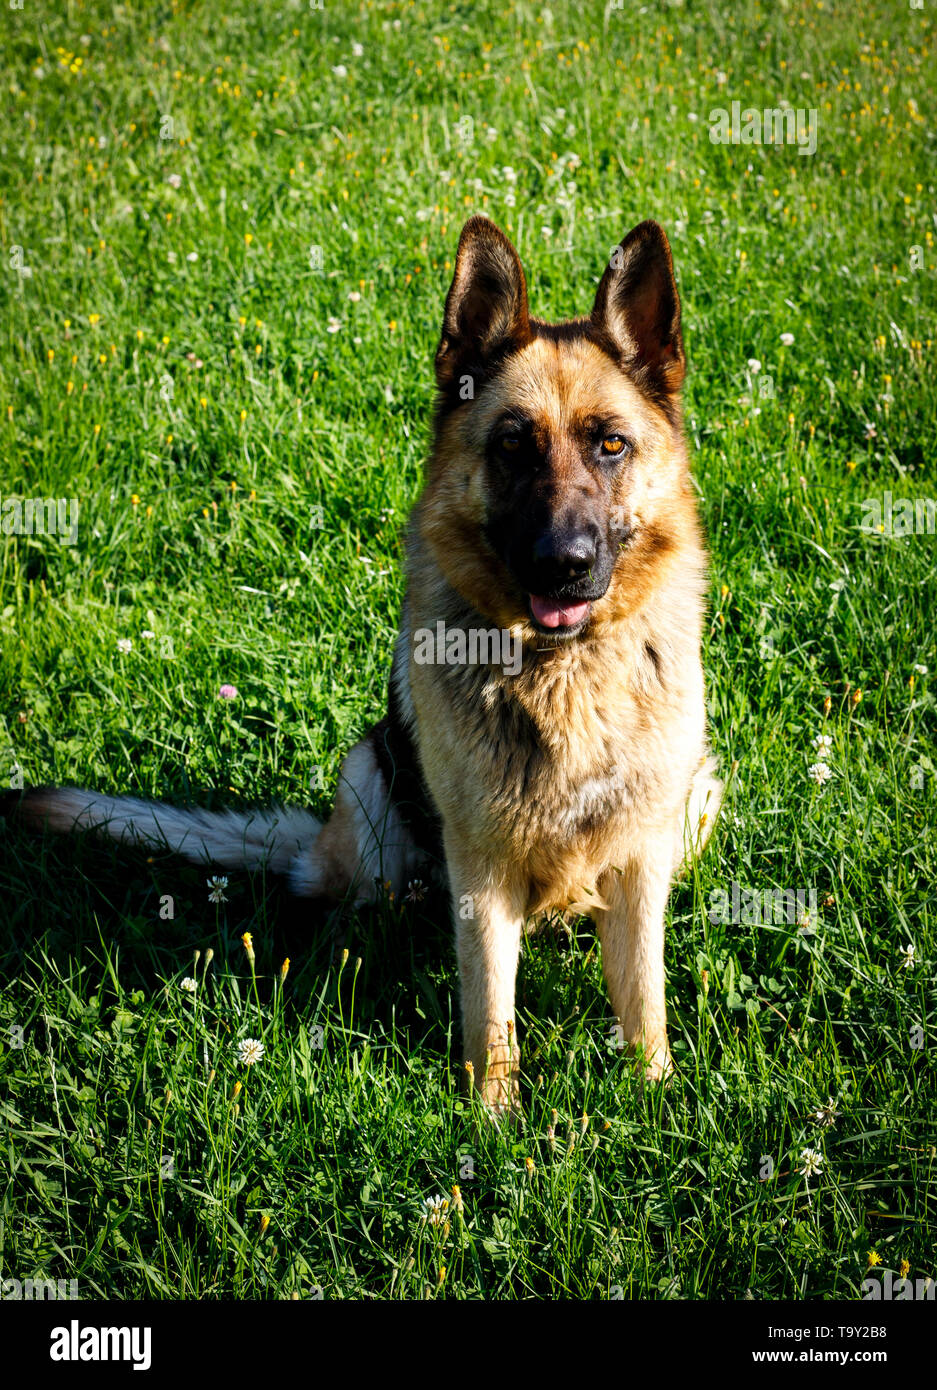 faithful family member dog looking pride to its human pack and spreading happiness Stock Photo